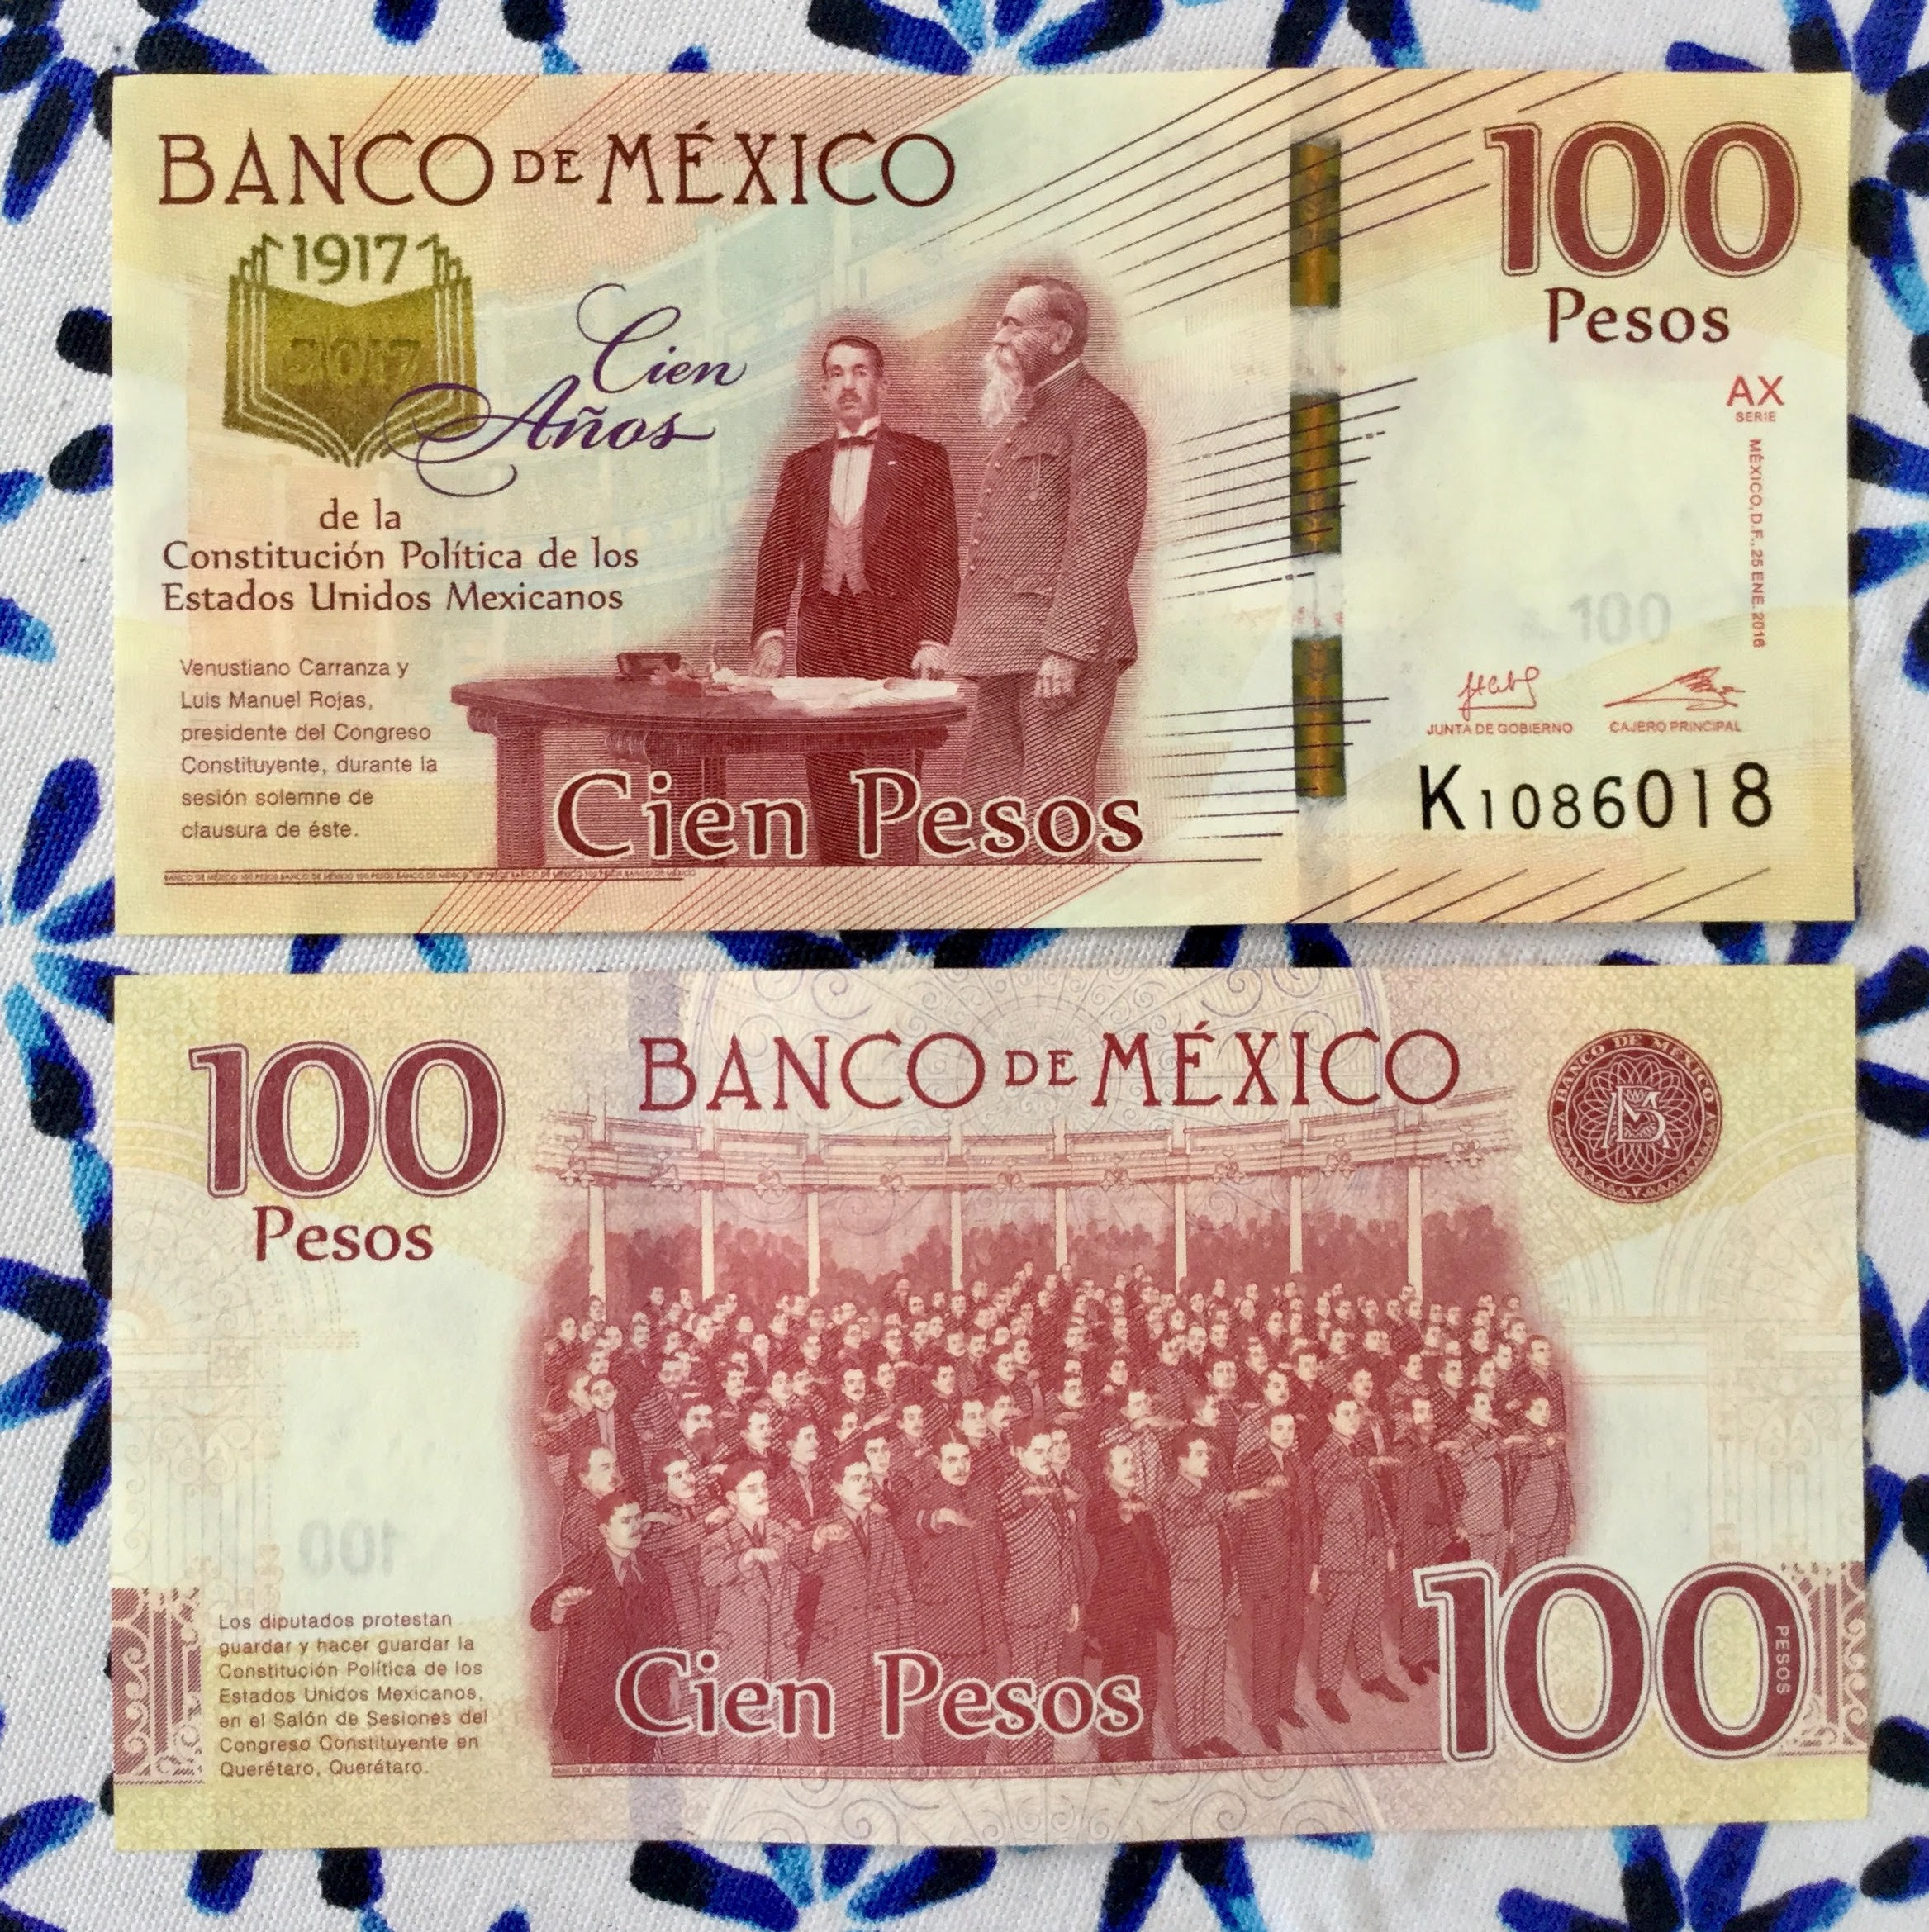 1917 2017 100 MEXICAN PESOS BANK NOTE COMMEMORATIVE BILL 100 YEARS ANNIVERSARY 